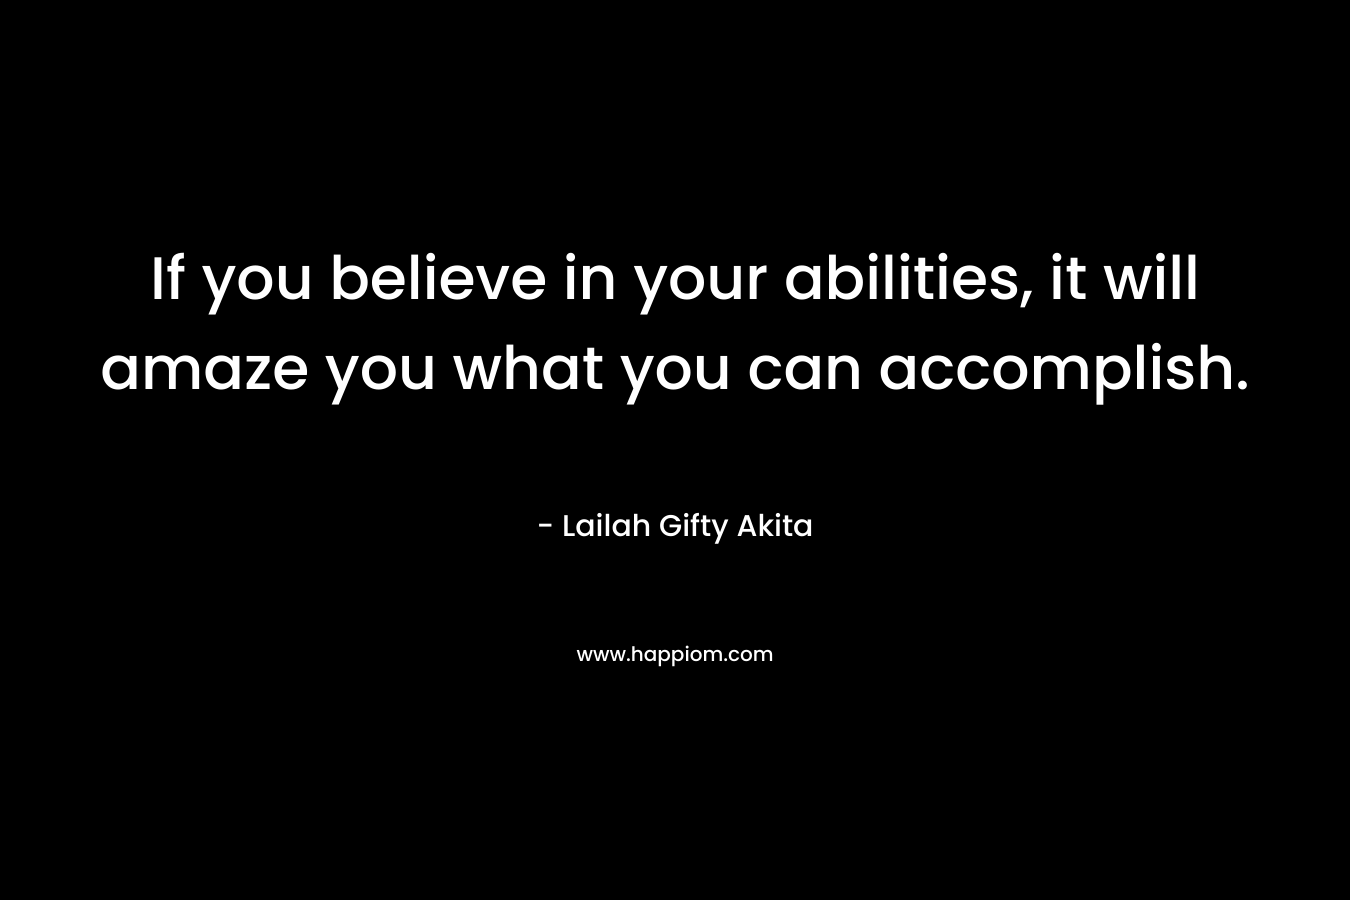 If you believe in your abilities, it will amaze you what you can accomplish.